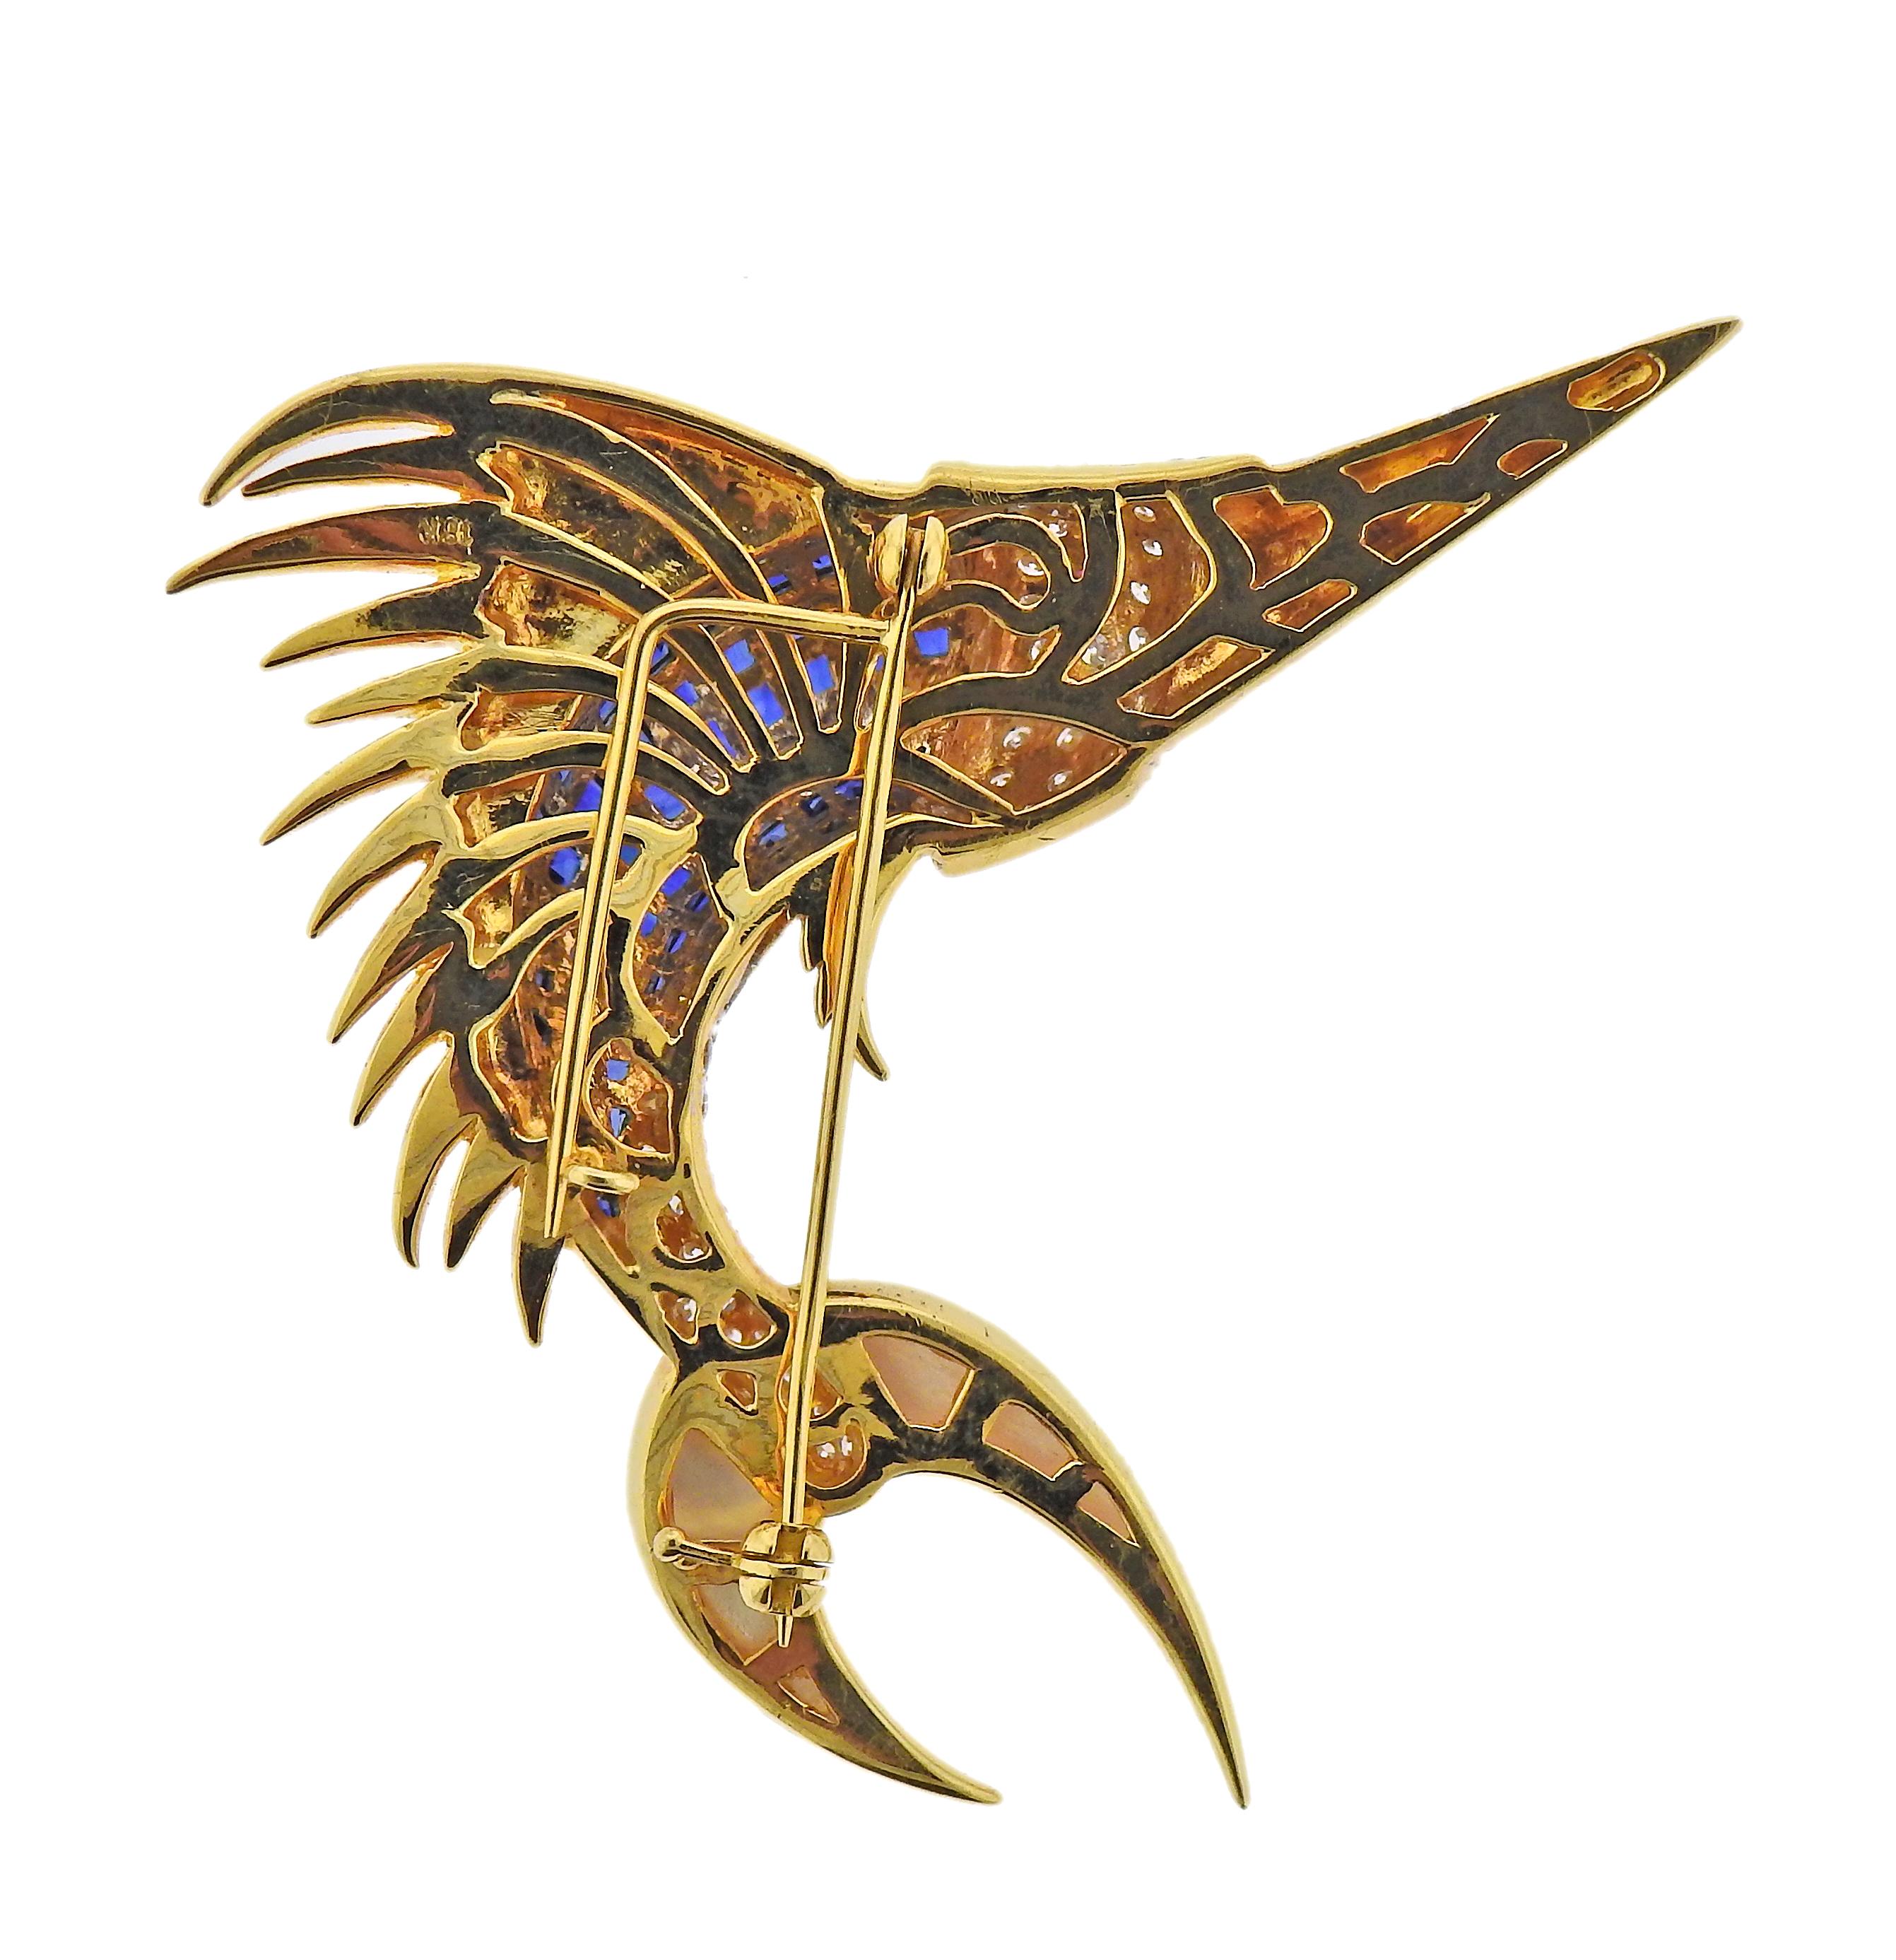 18k gold fish brooch, featuring invisible set blue sapphires, carved mother of pearl, ruby eye and diamonds. Brooch is 65mm x 67mm. Marked 18k. Weight - 30.3 grams. One small sapphire is missing. 